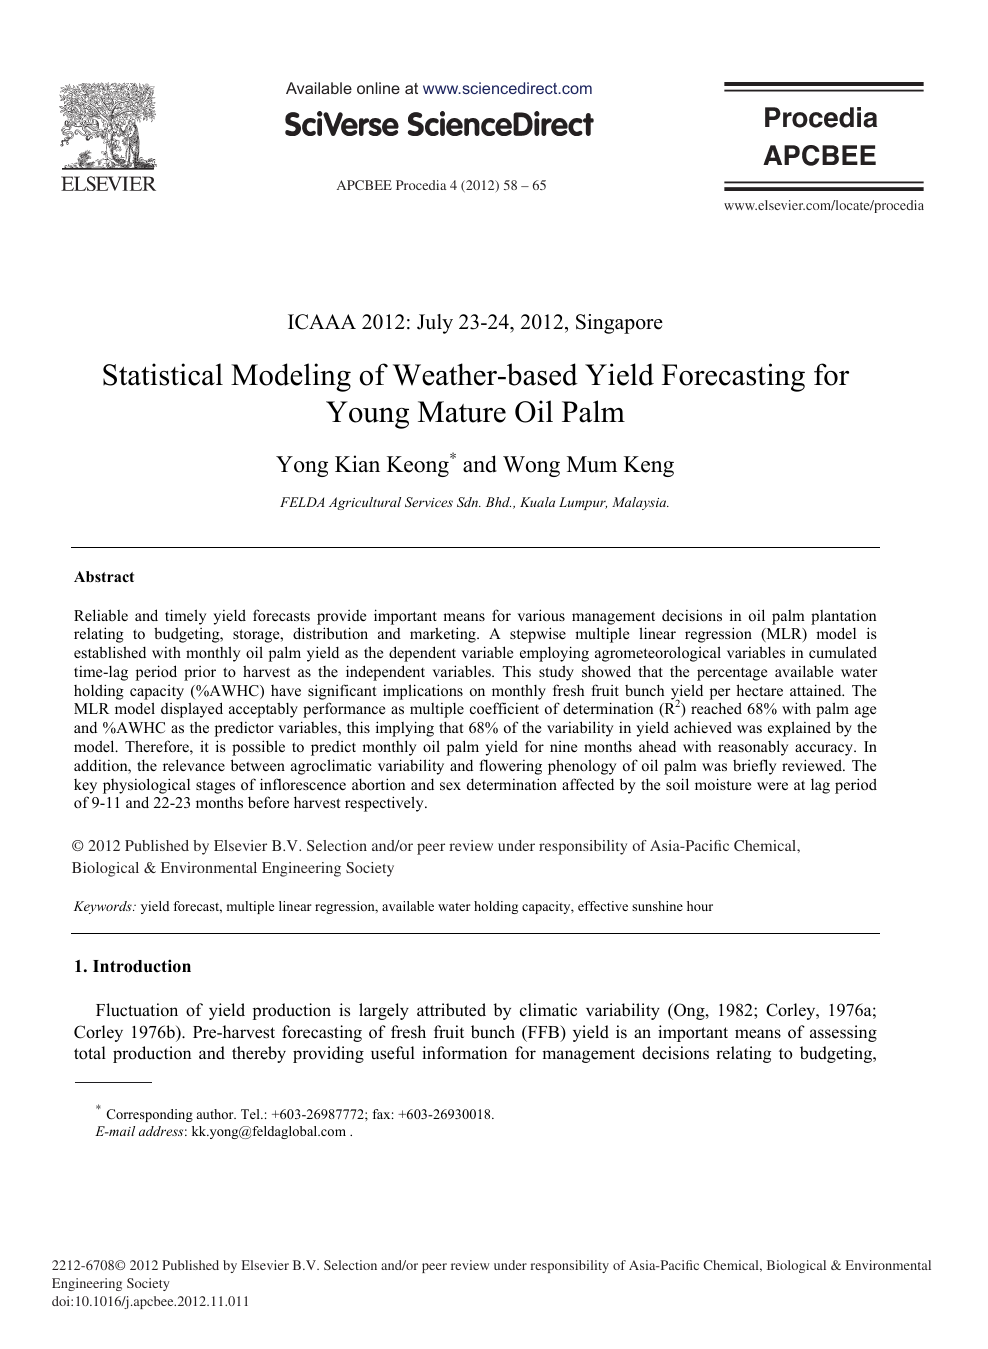 Statistical Modeling Of Weather Based Yield Forecasting For Young Mature Oil Palm Topic Of Research Paper In Agriculture Forestry And Fisheries Download Scholarly Article Pdf And Read For Free On Cyberleninka Open